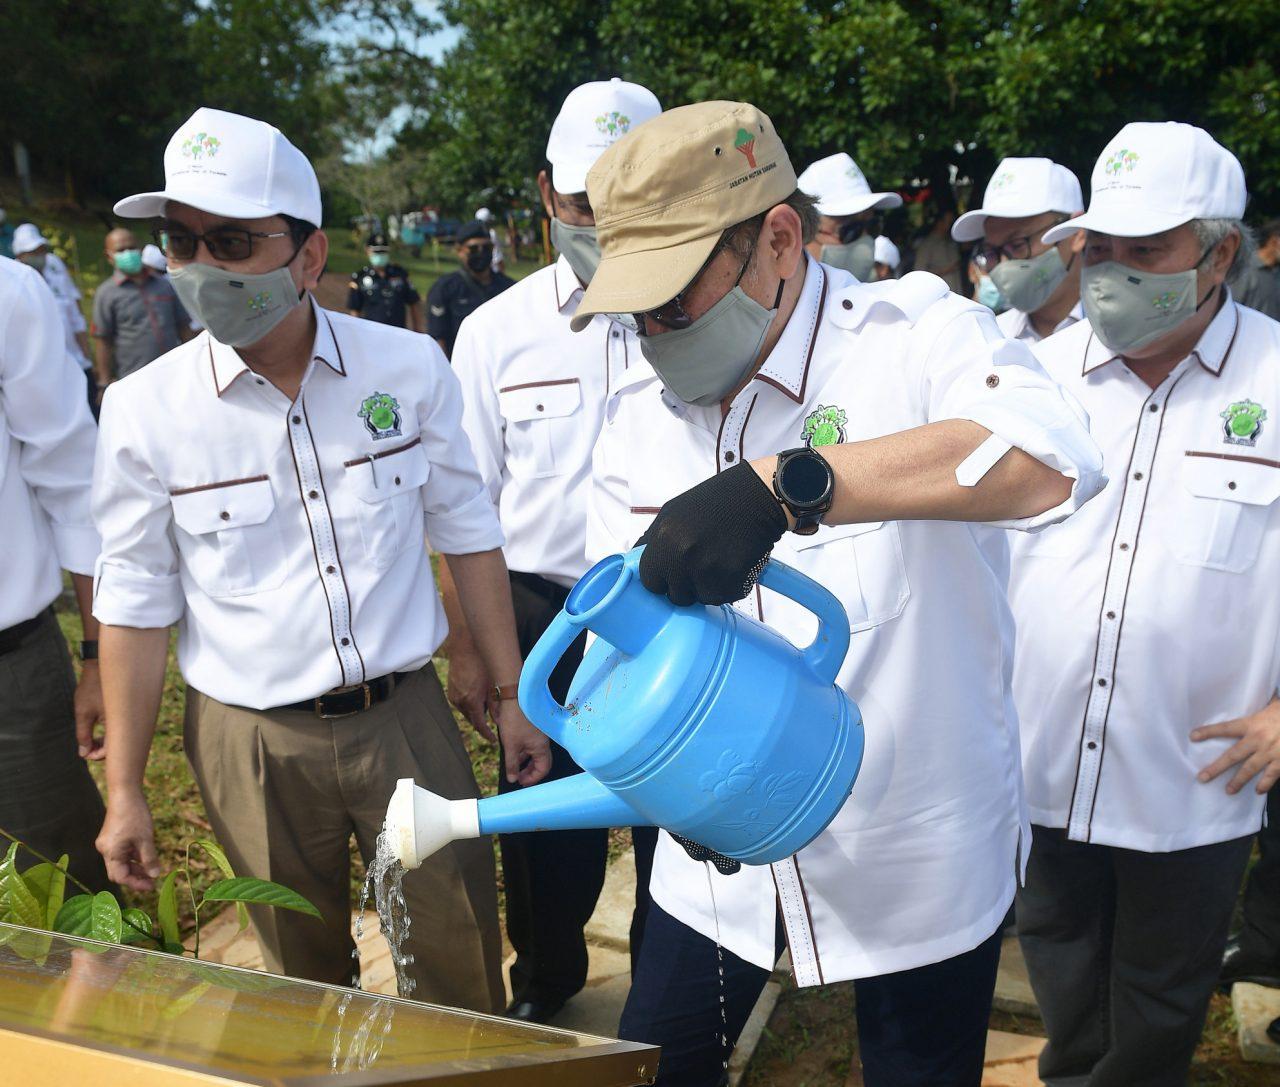 Sarawak Chief Minister Abang Johari Openg (second right) waters a plant at the state-level celebration of International Forest Day in Kuching today. With him is his deputy Awang Tengah Ali Hasan (right). Photo: Bernama